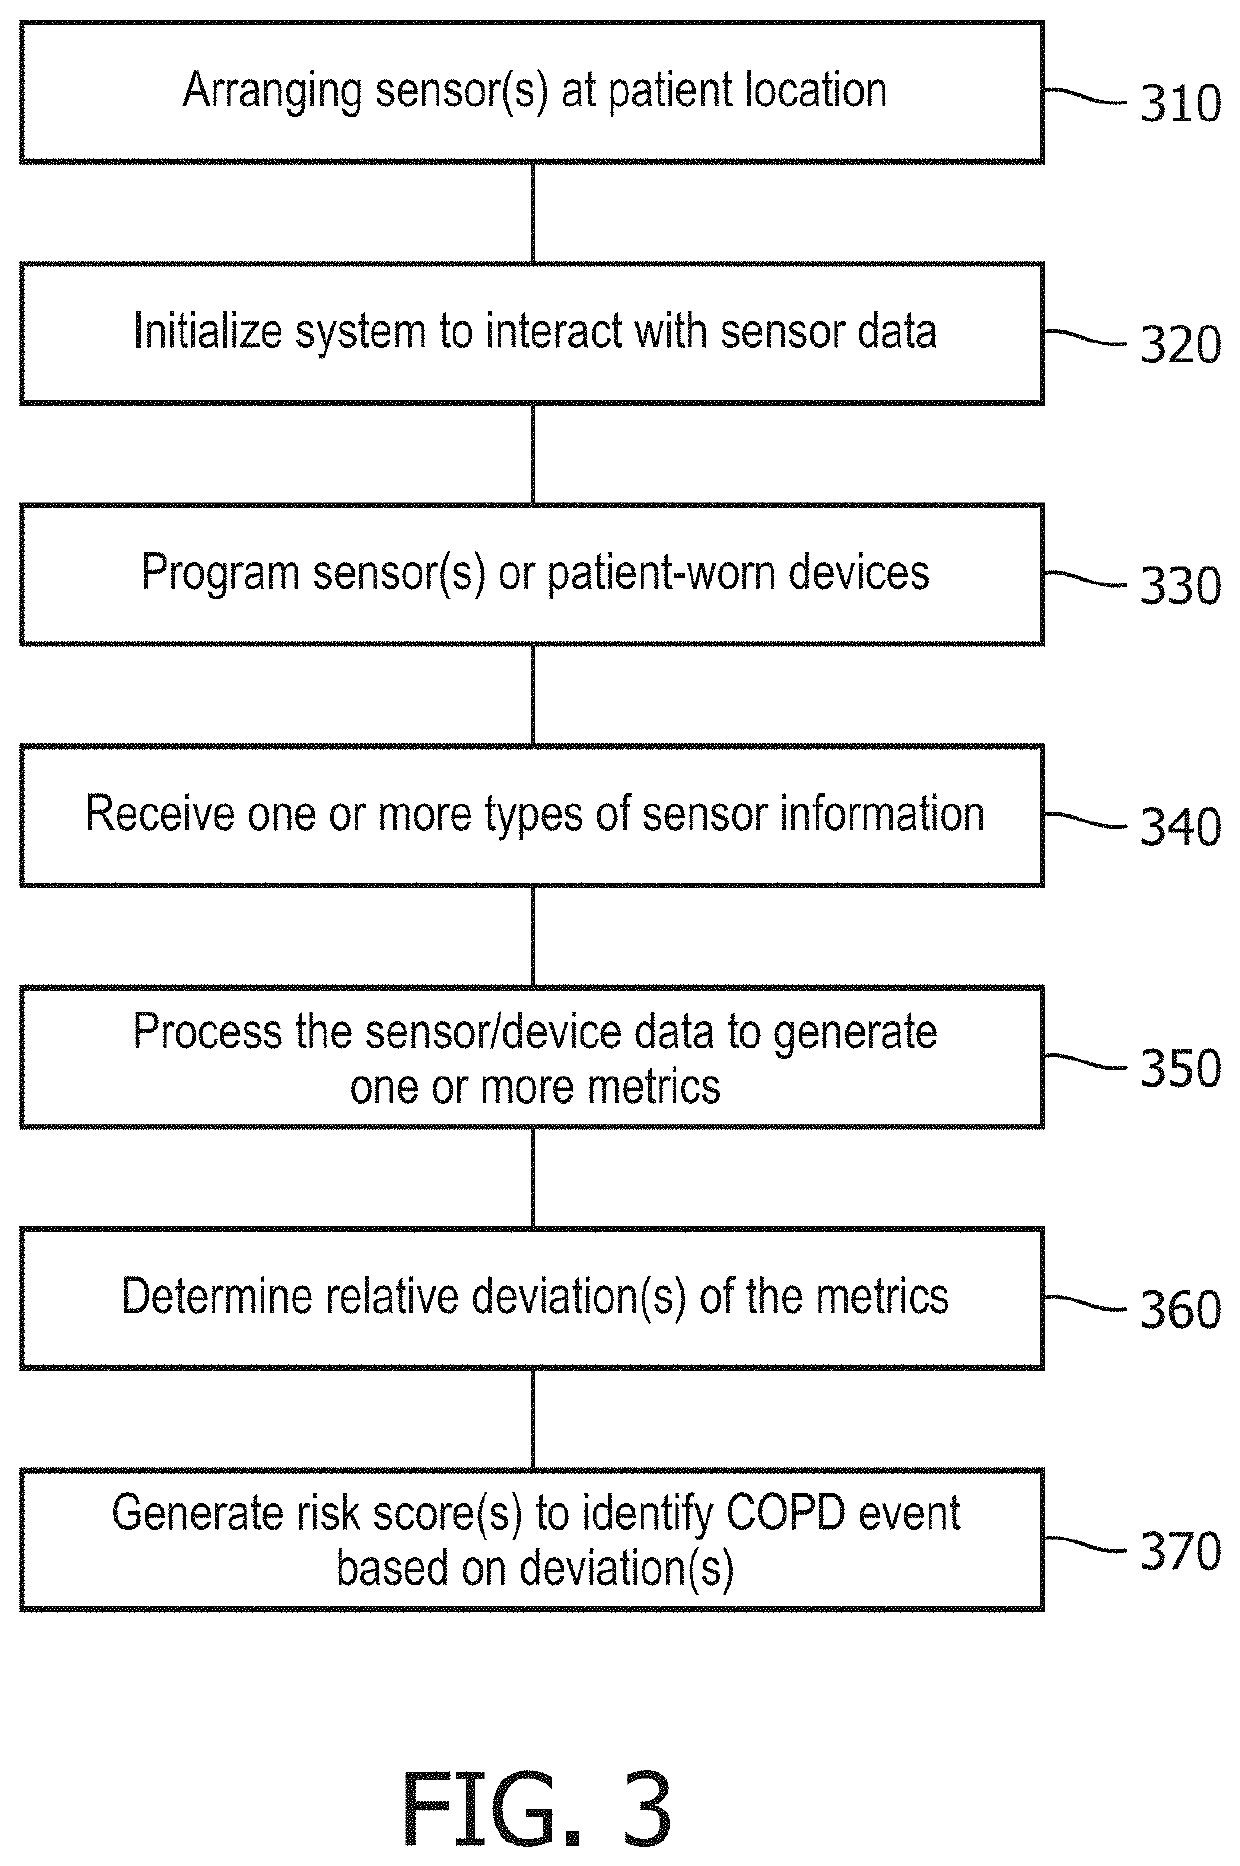 Monitoring a patient with chronic obstructive pulmonary disease